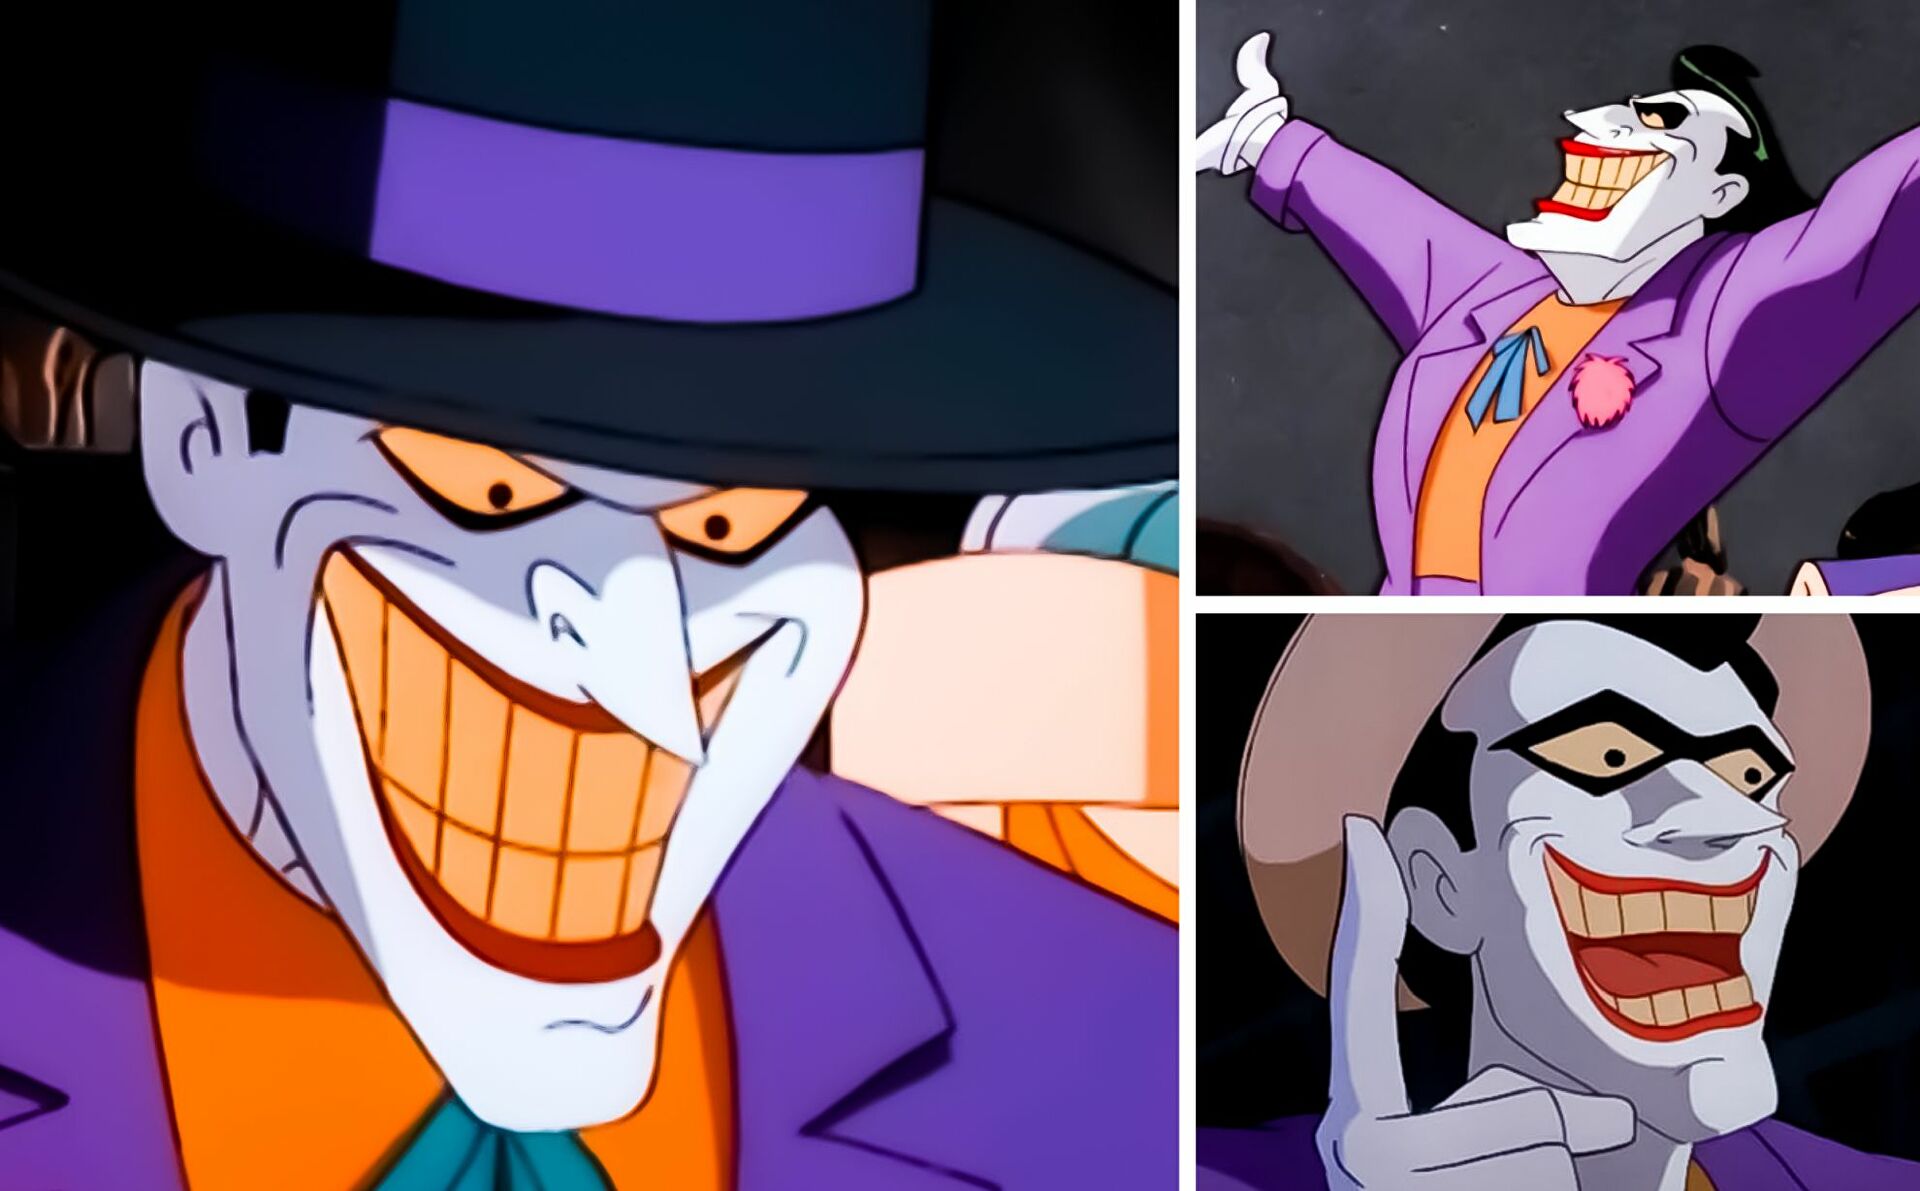 MultiVersus datamine suggests Mark Hamill’s Joker may be coming to the game